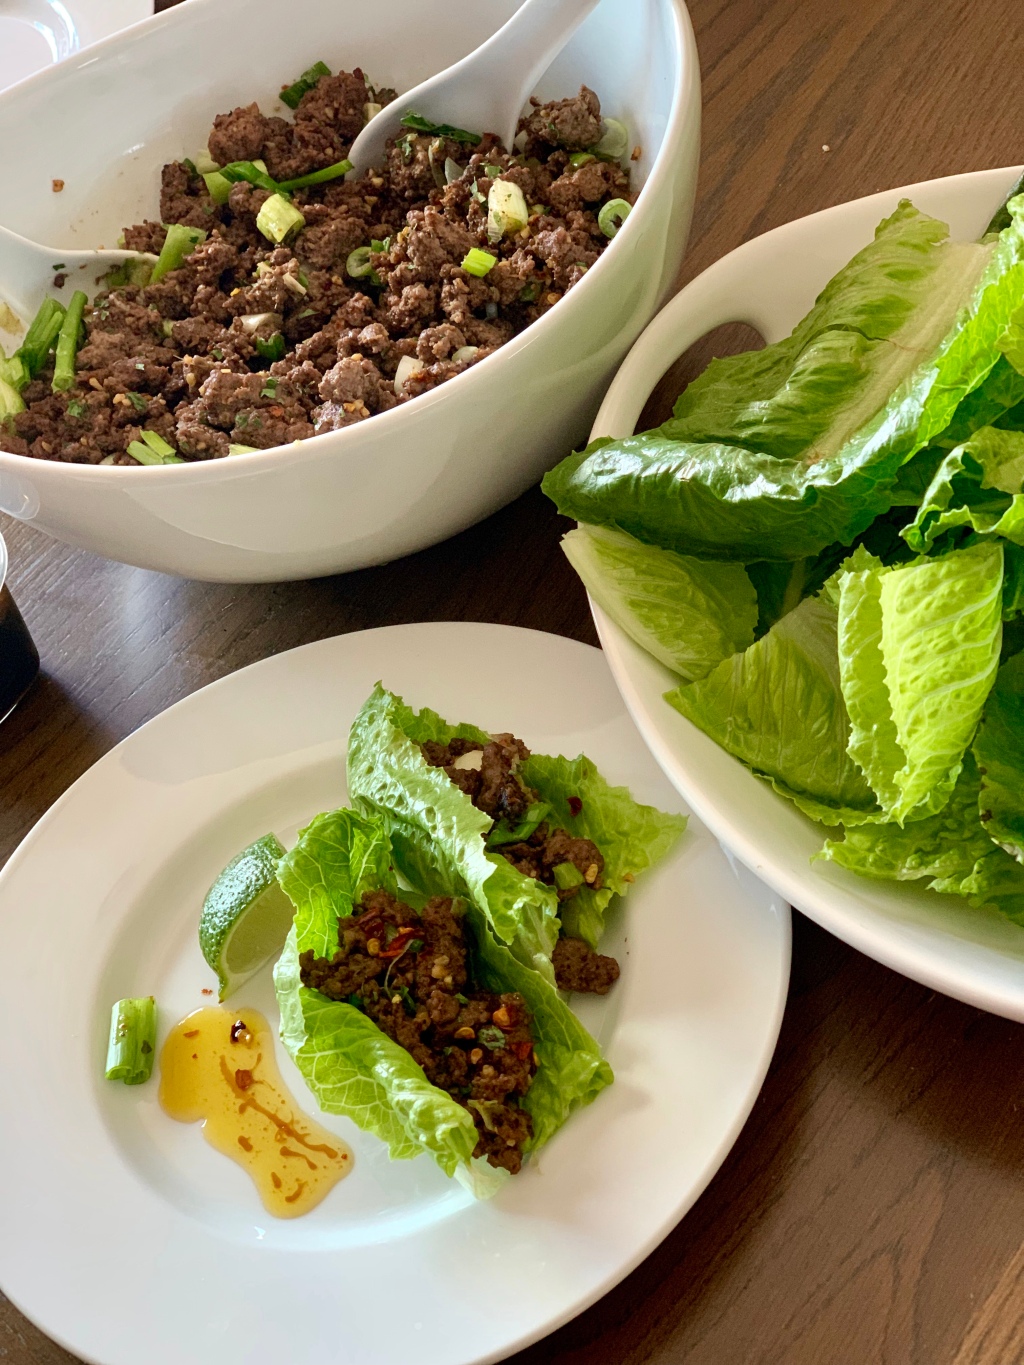 Chili beef with lettuce wraps